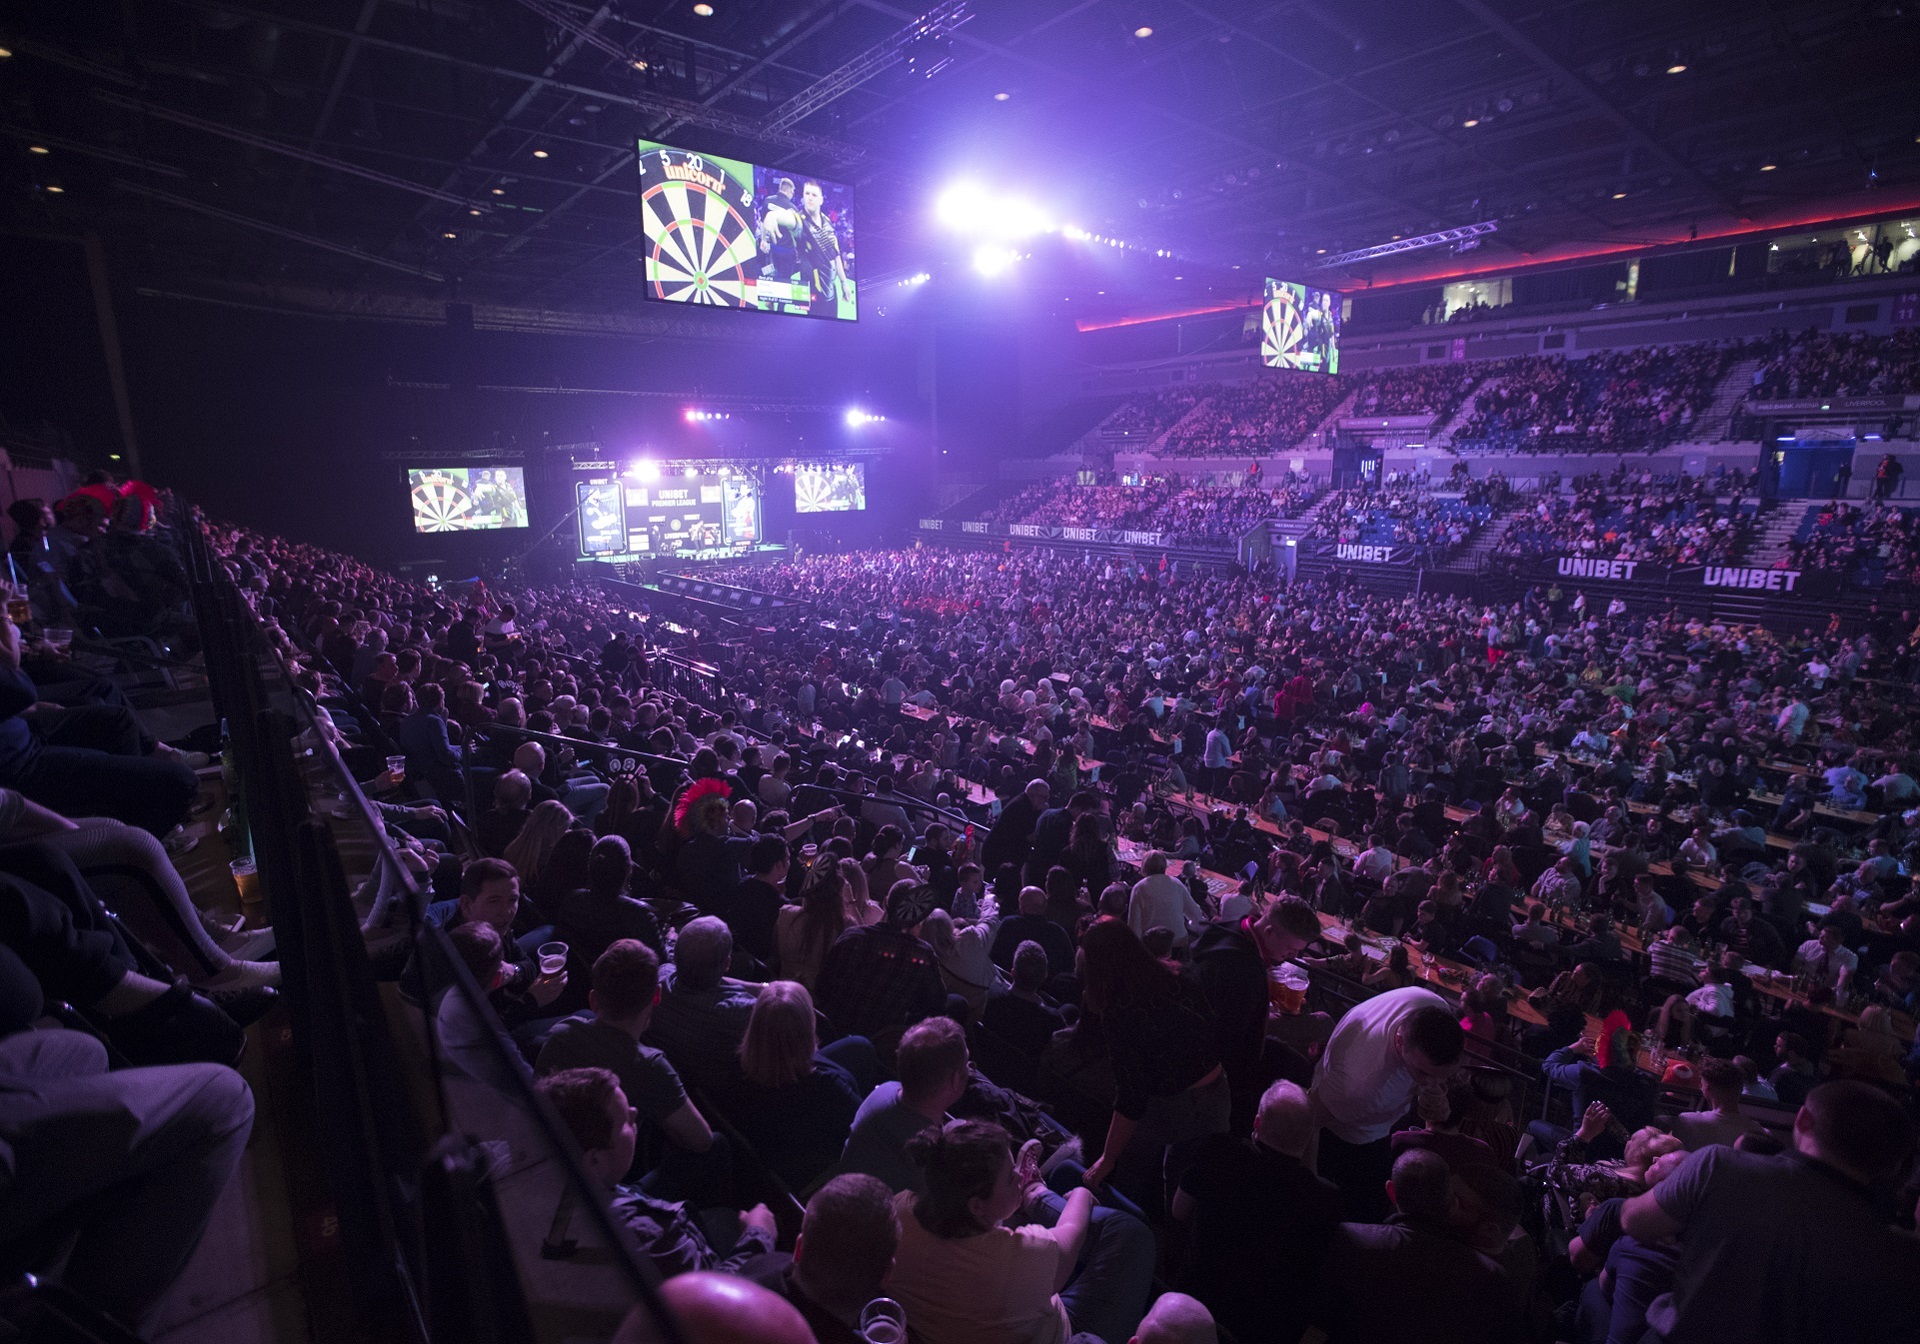 The M&S Bank Arena, Liverpool (Lawrence Lustig, PDC)